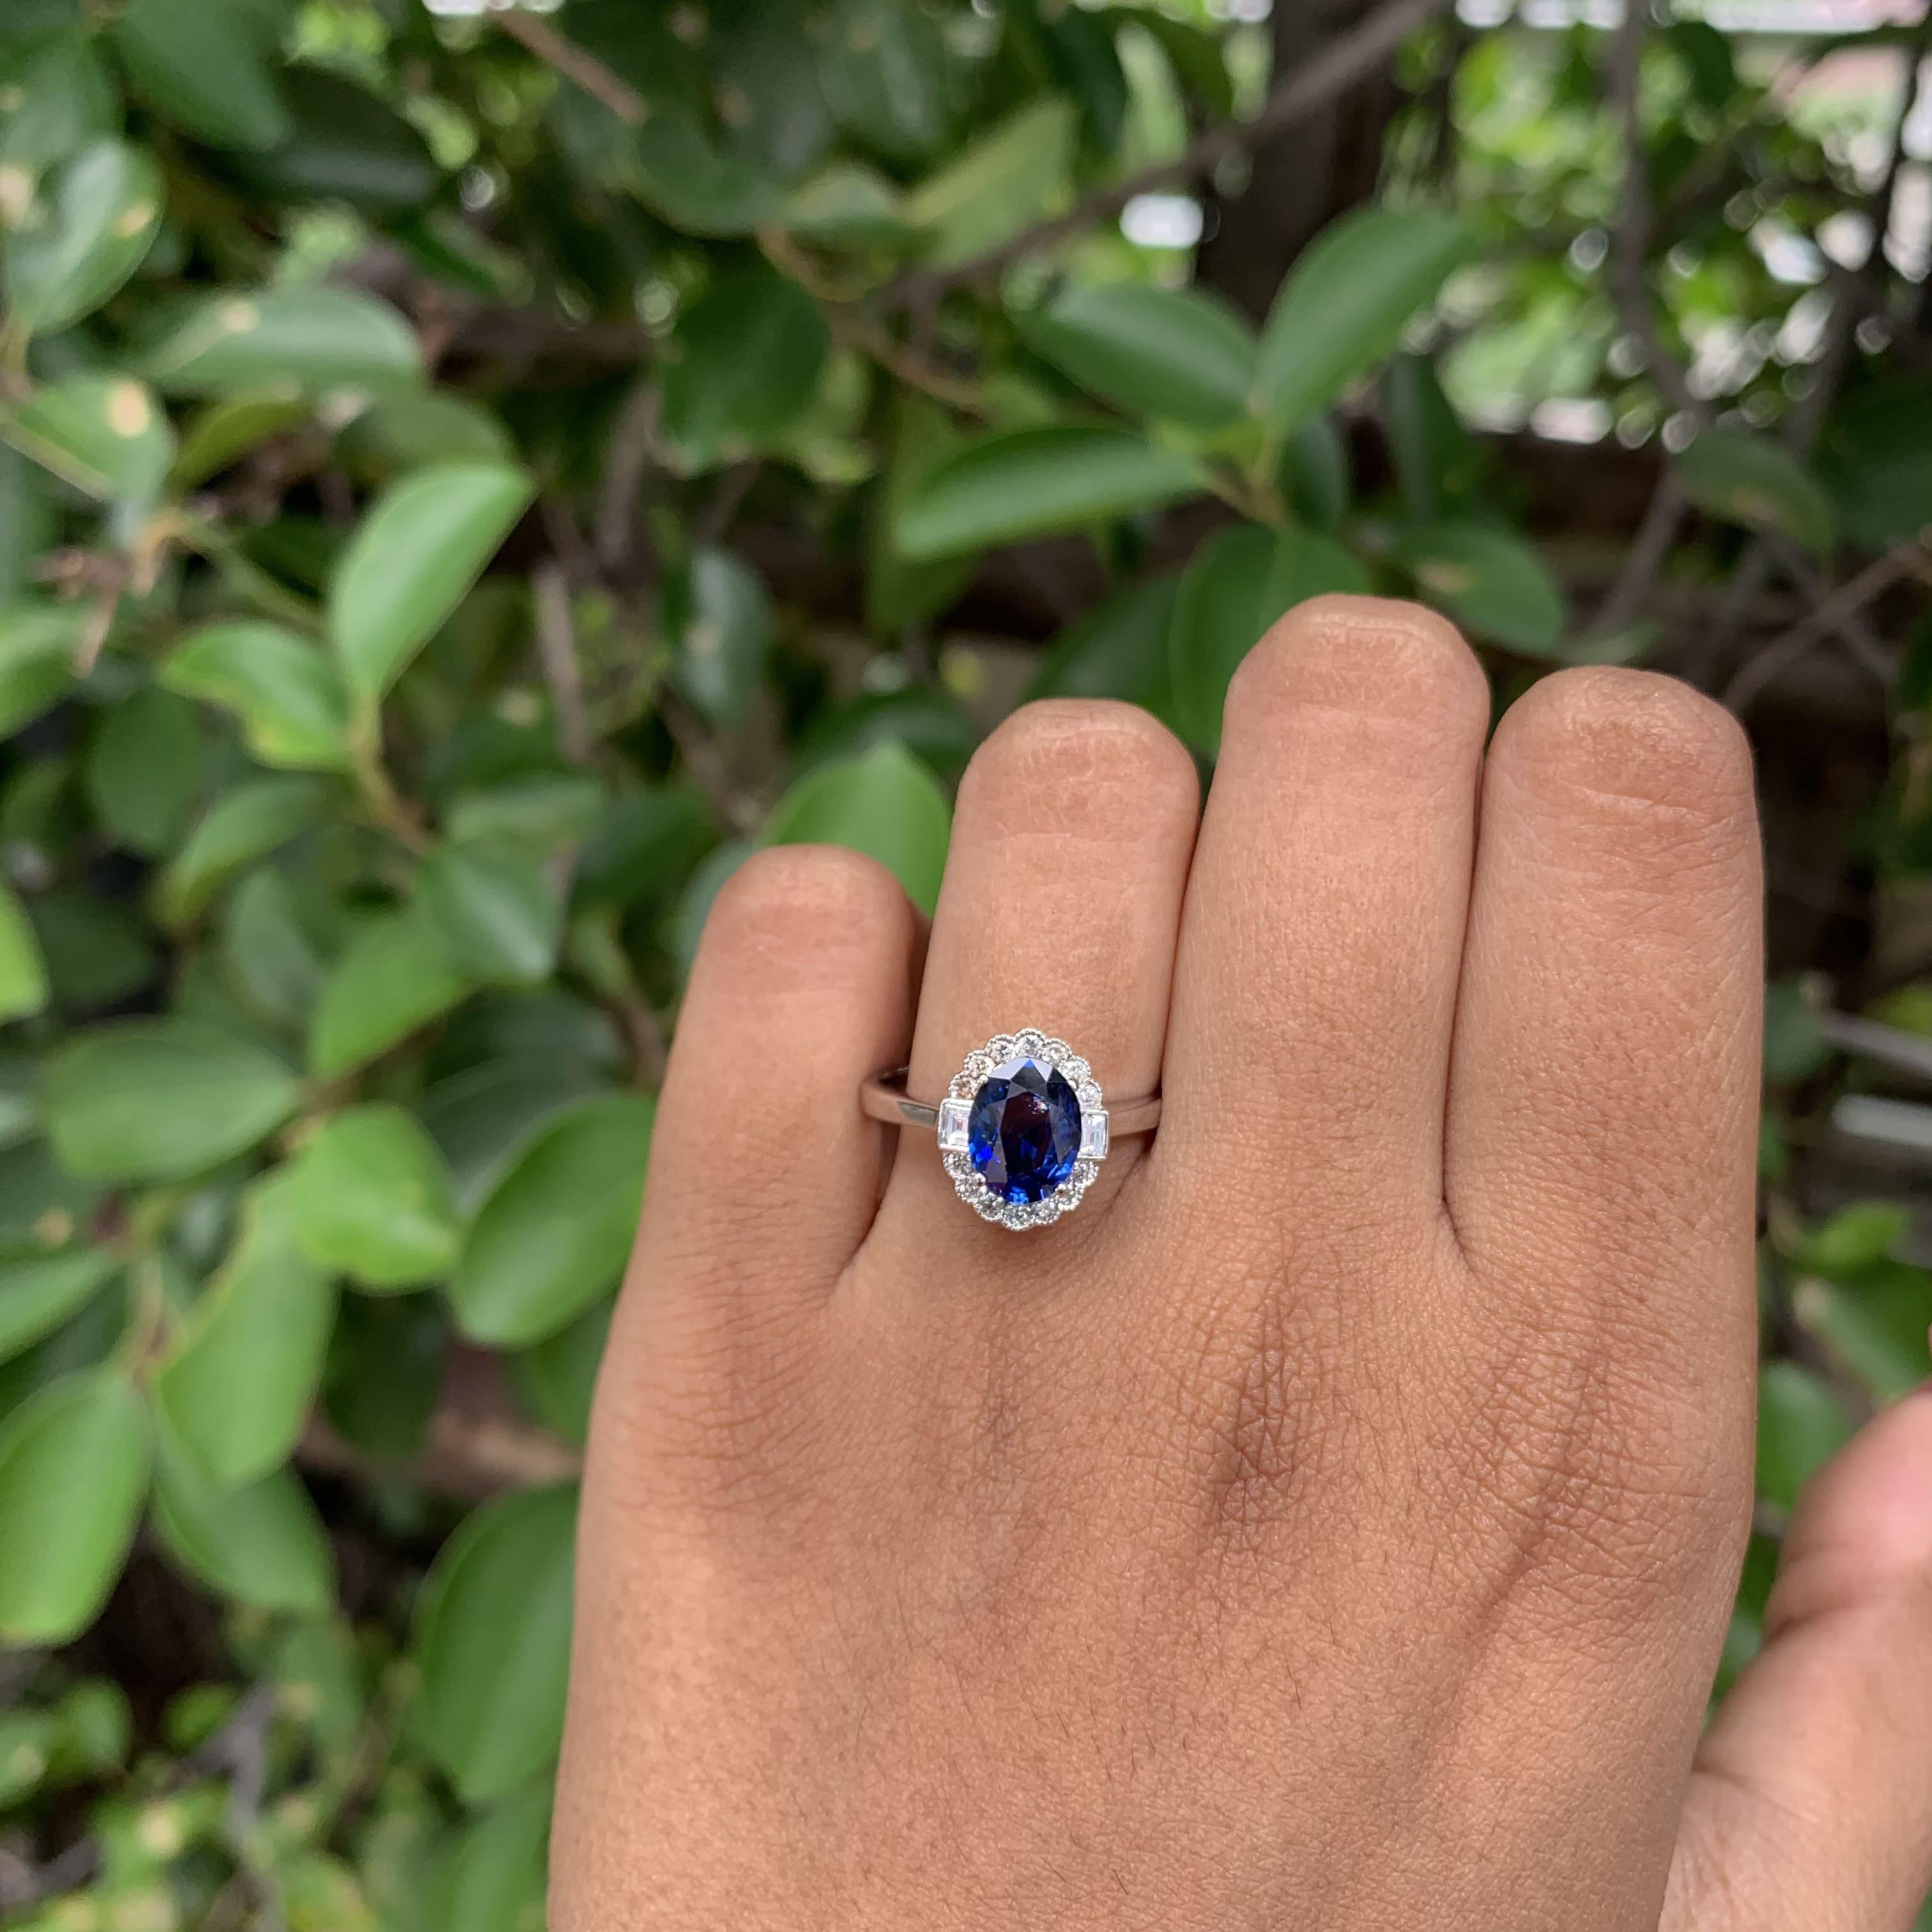 1.53 Carat Royal Blue Ceylon Sapphire Ring with Halo Diamonds in 18K Gold For Sale 5